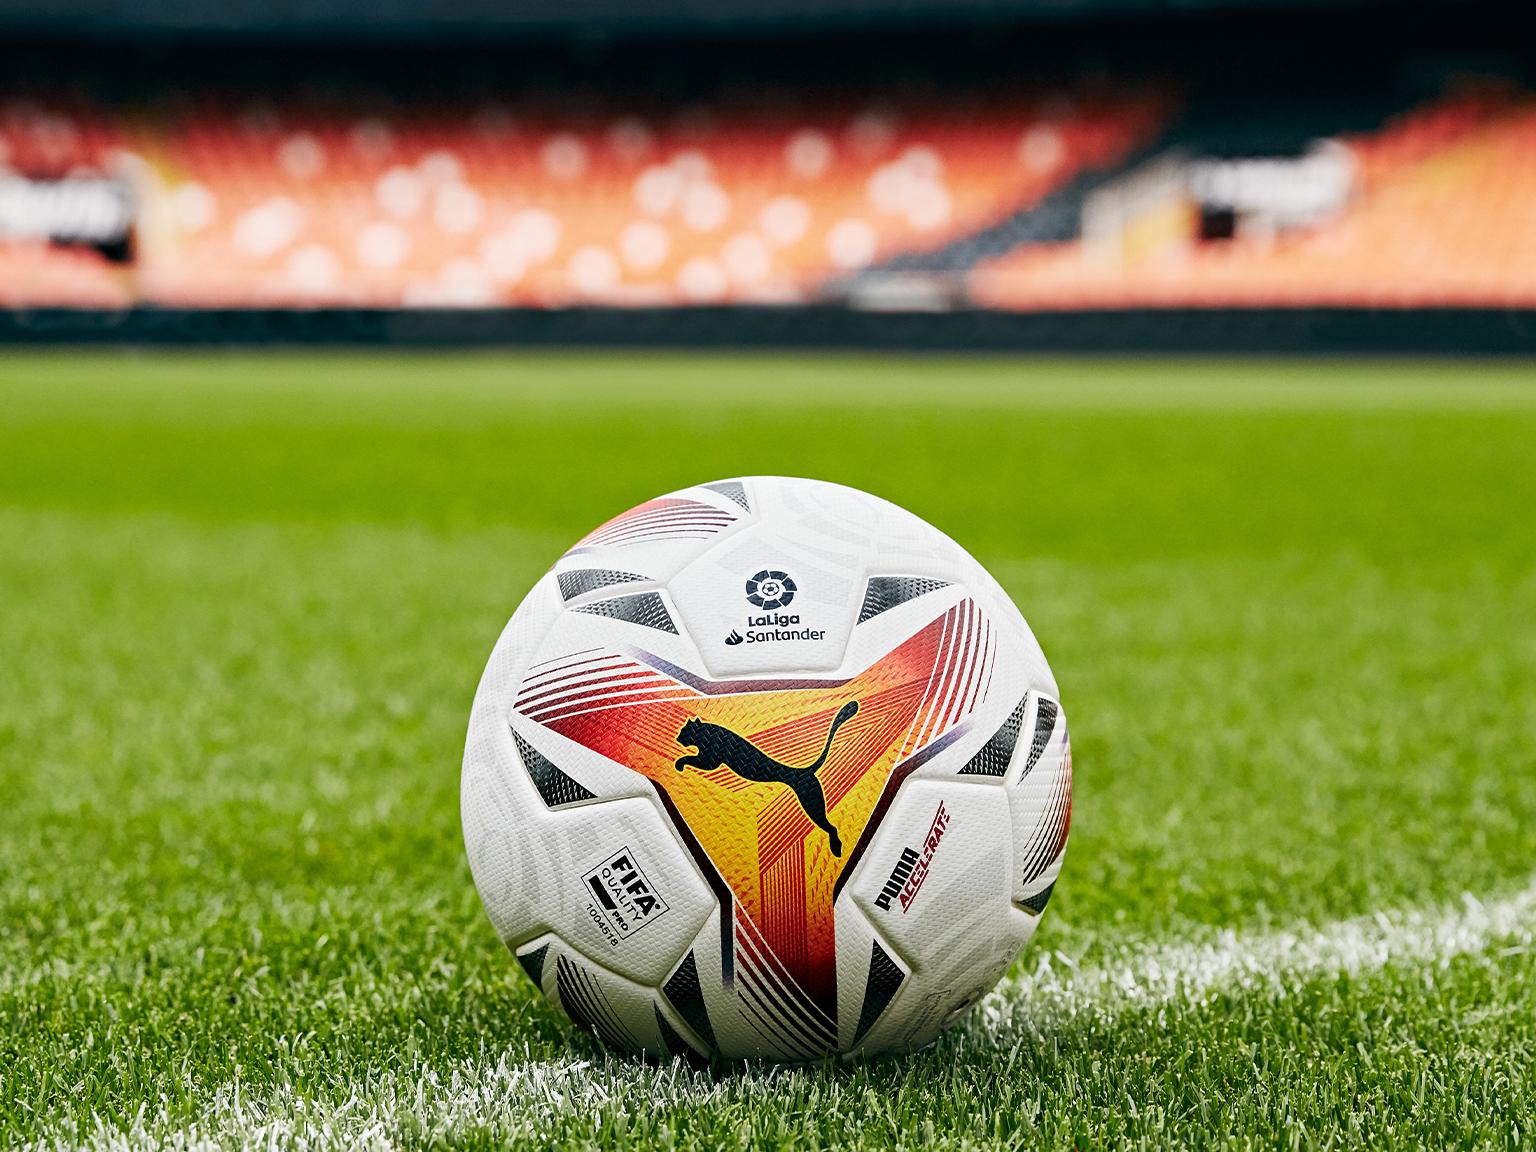 PUMA BRINGS THE FIRE WITH THE NEW ACCELERATE MATCH BALL FOR THE